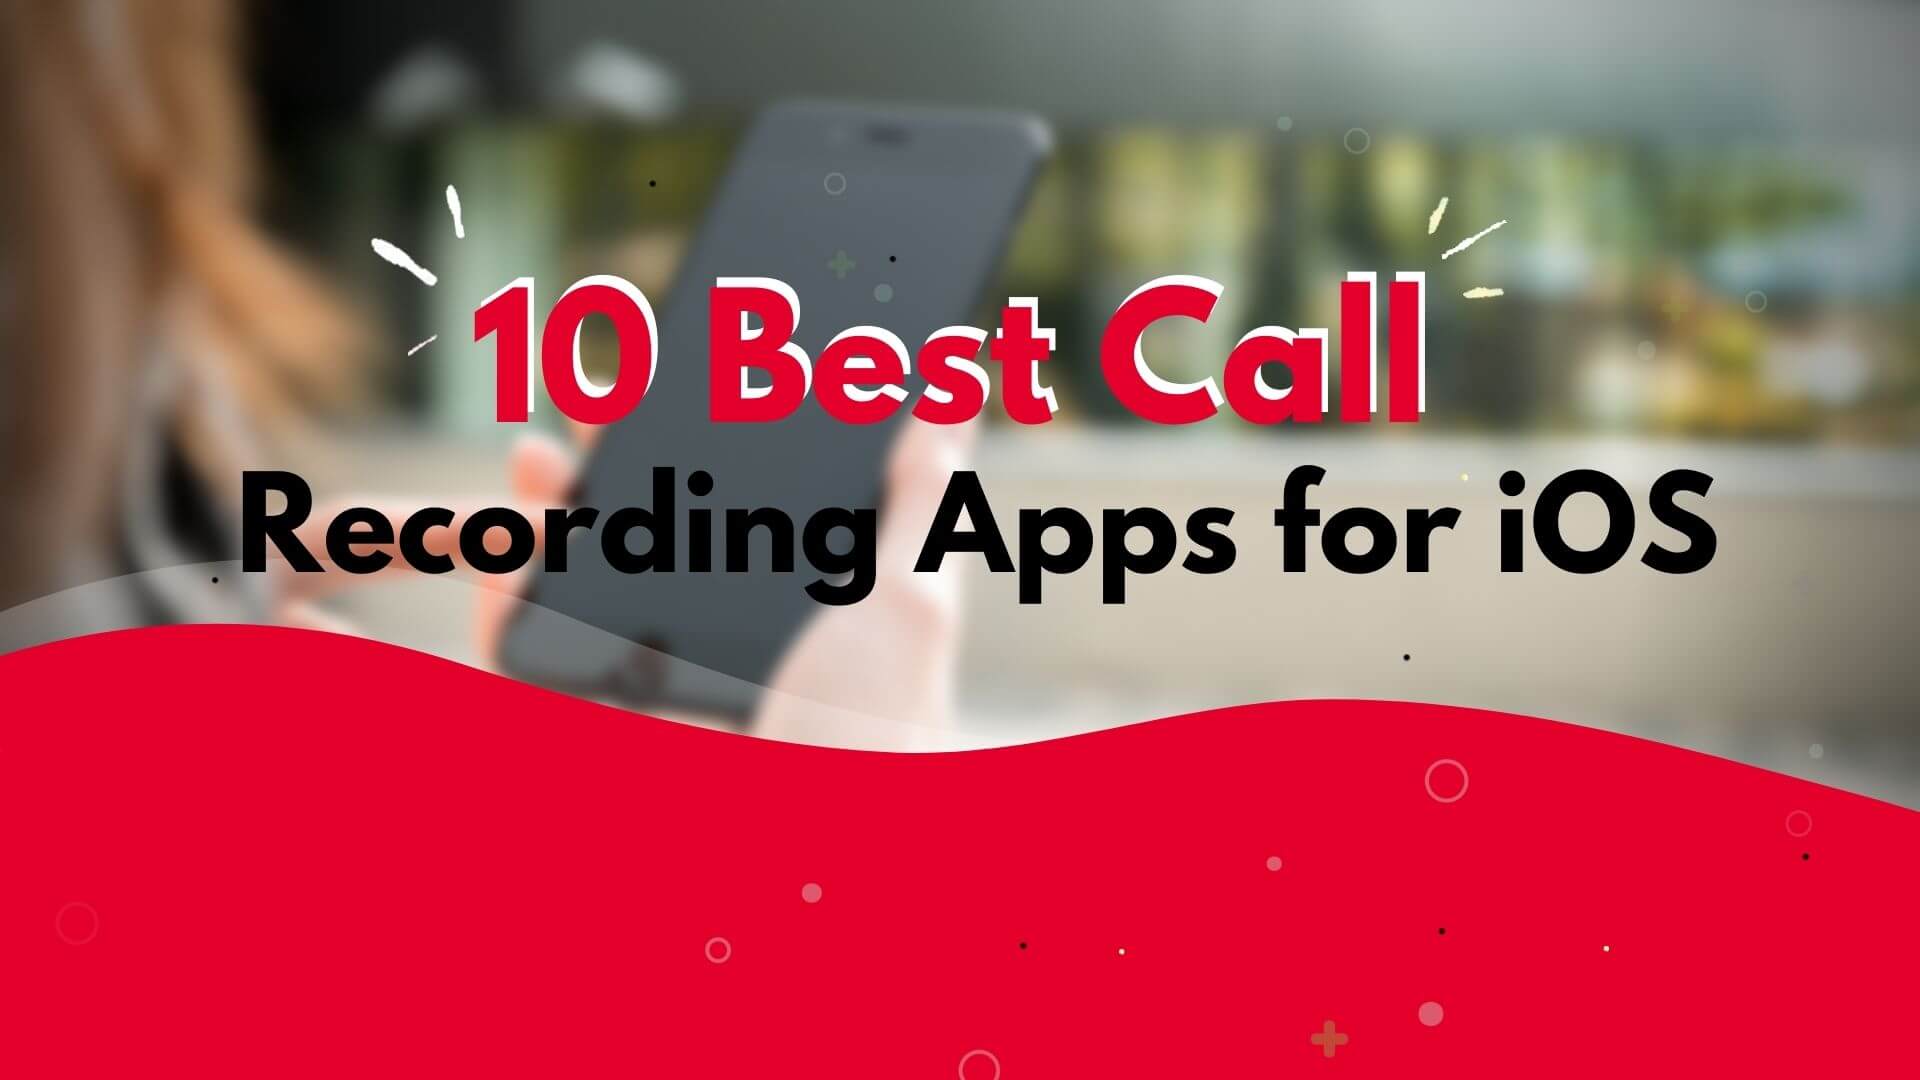 10 Best Call Recording Apps for iOS 2021